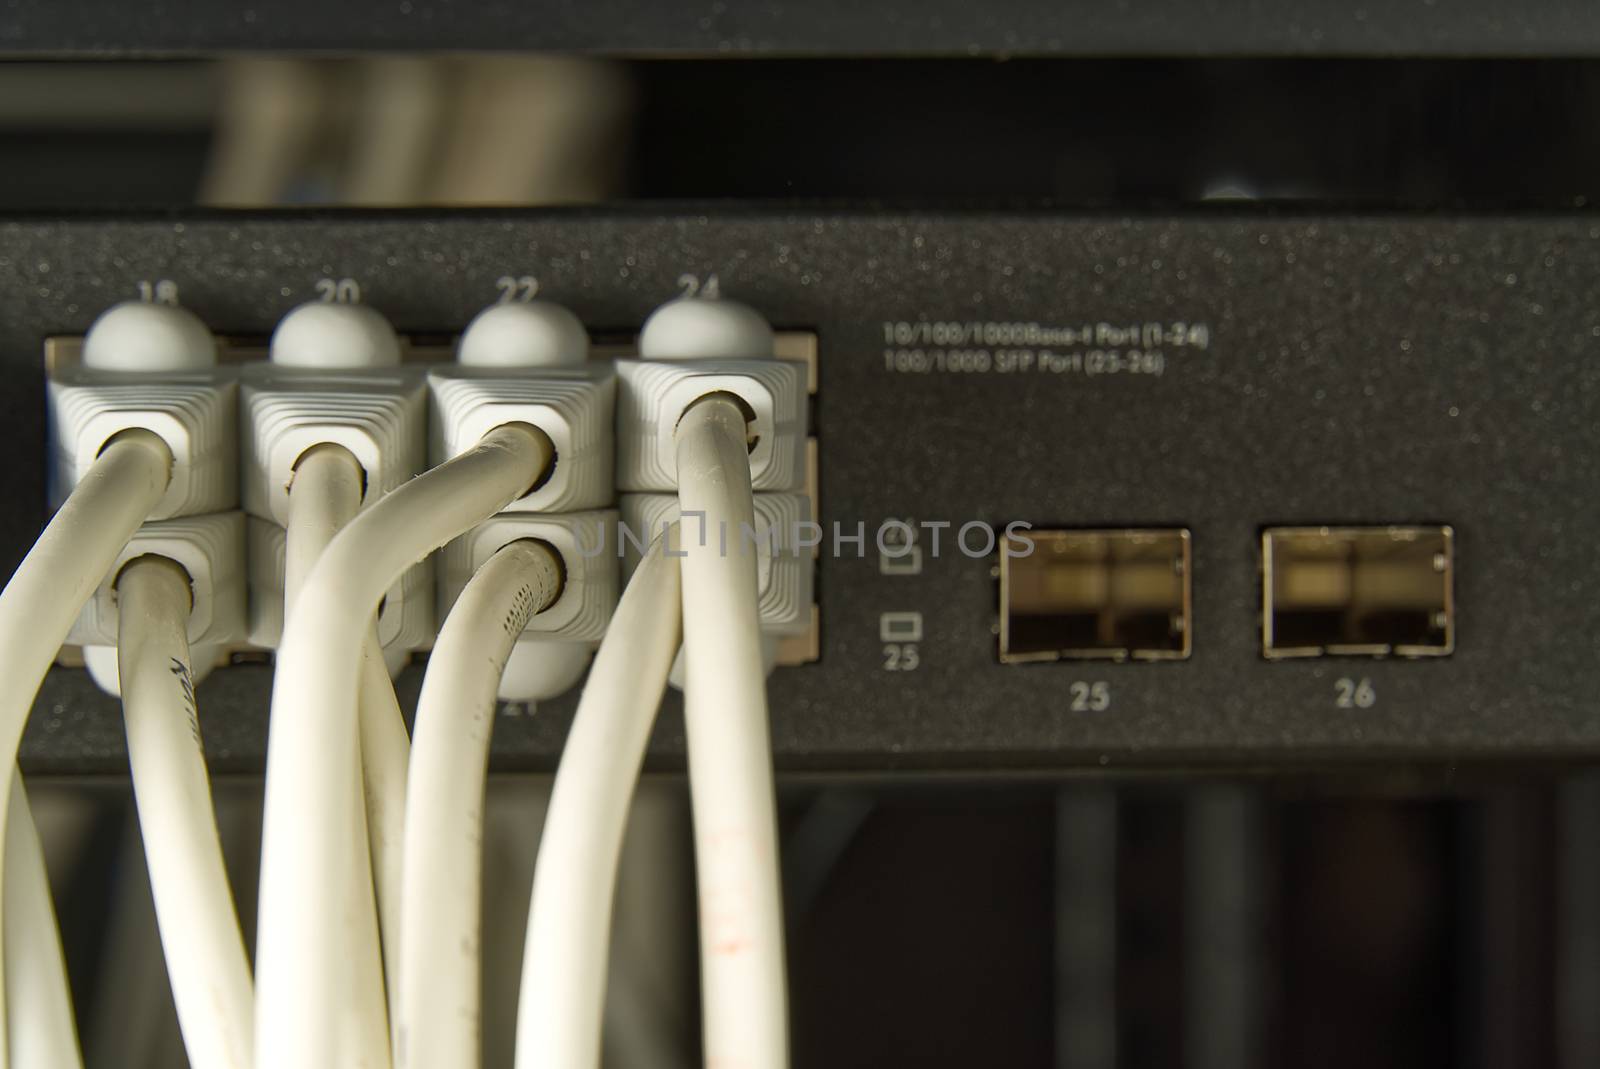 Network switch and ethernet cable in rack cabinet. Network connection technology thrue cat6 and cat5 wires. Network switch and cables. by PhotoTime